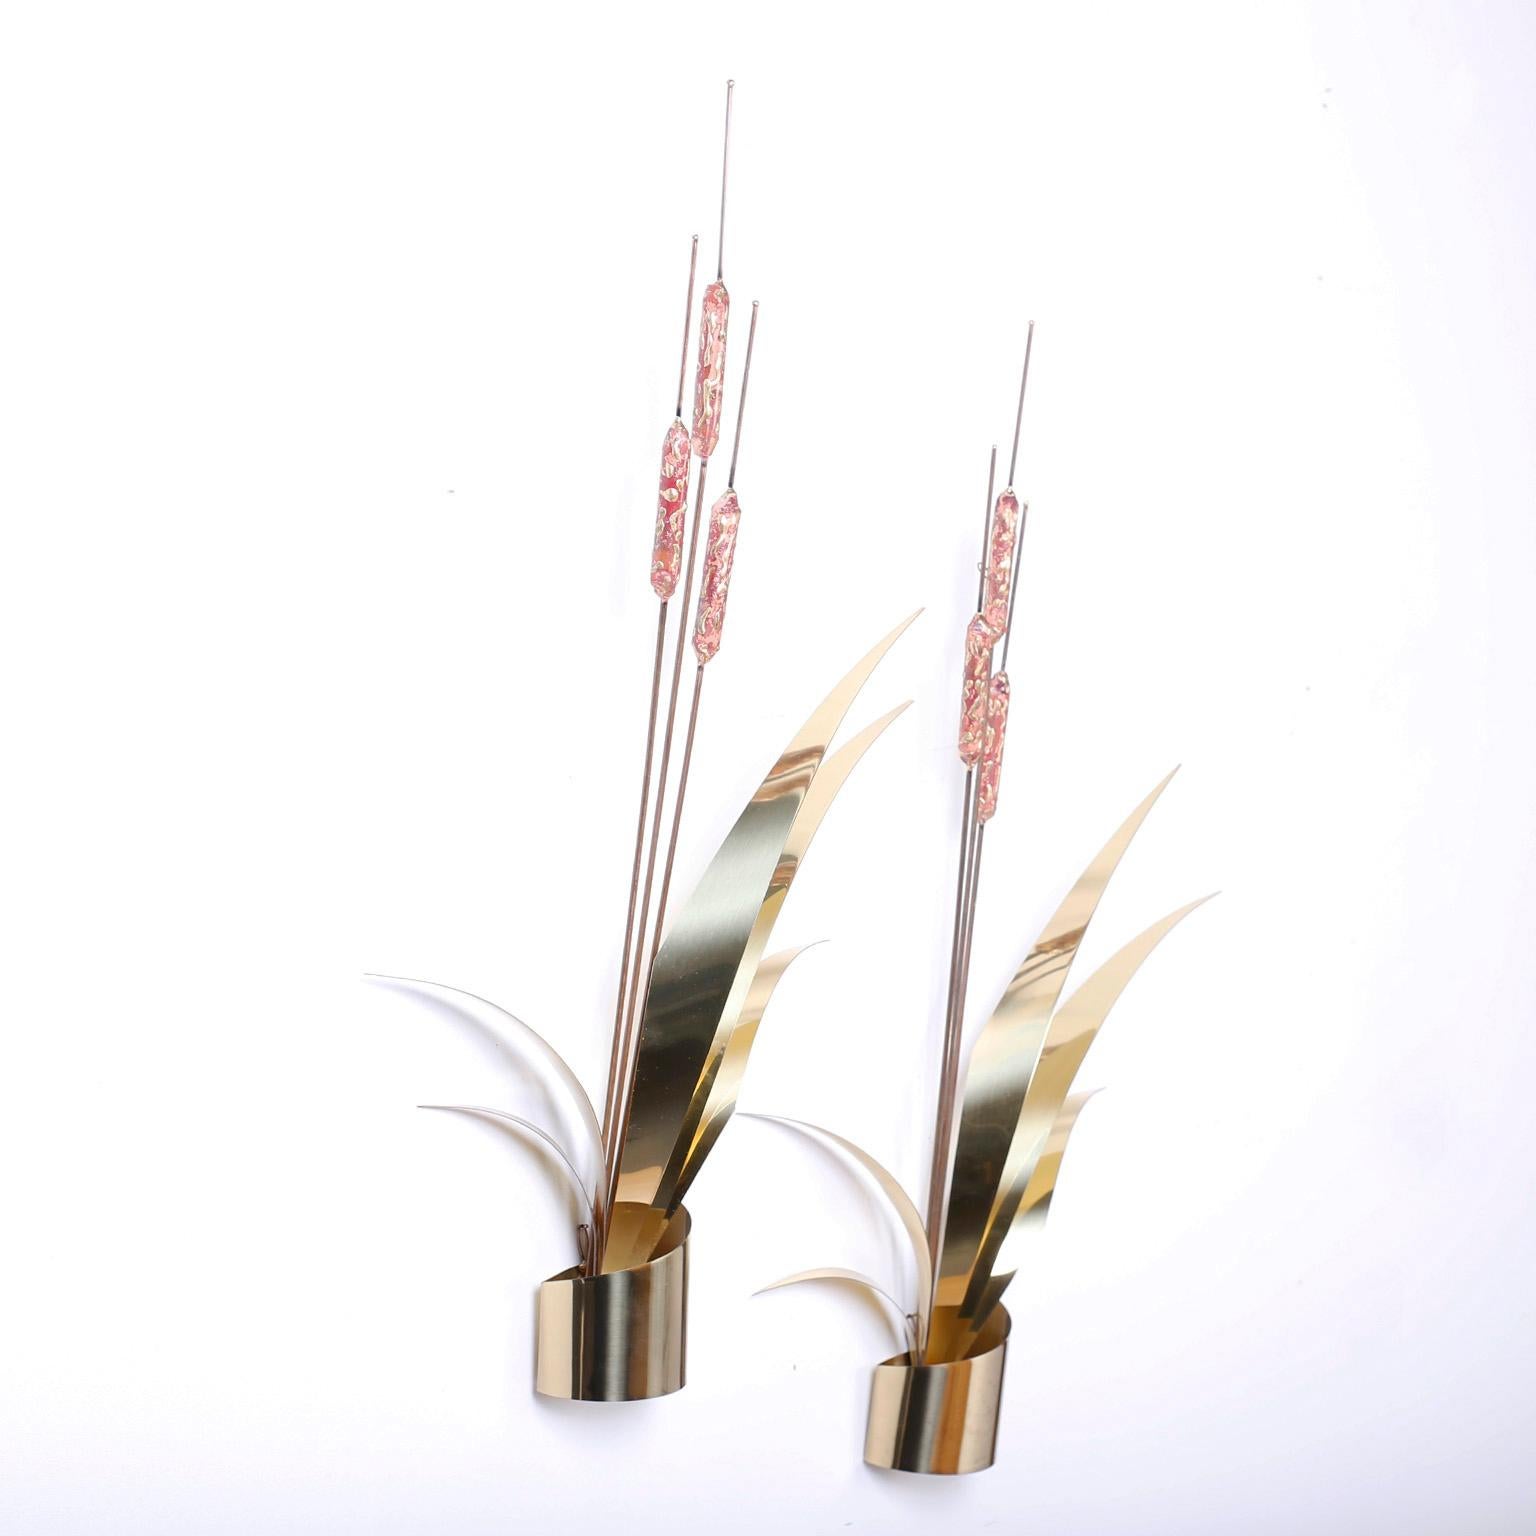 Swank pair of wall sculptures crafted in copper and brass in the form of stylized cattails or Typha. Hand polished and lacquered for easy care.
 